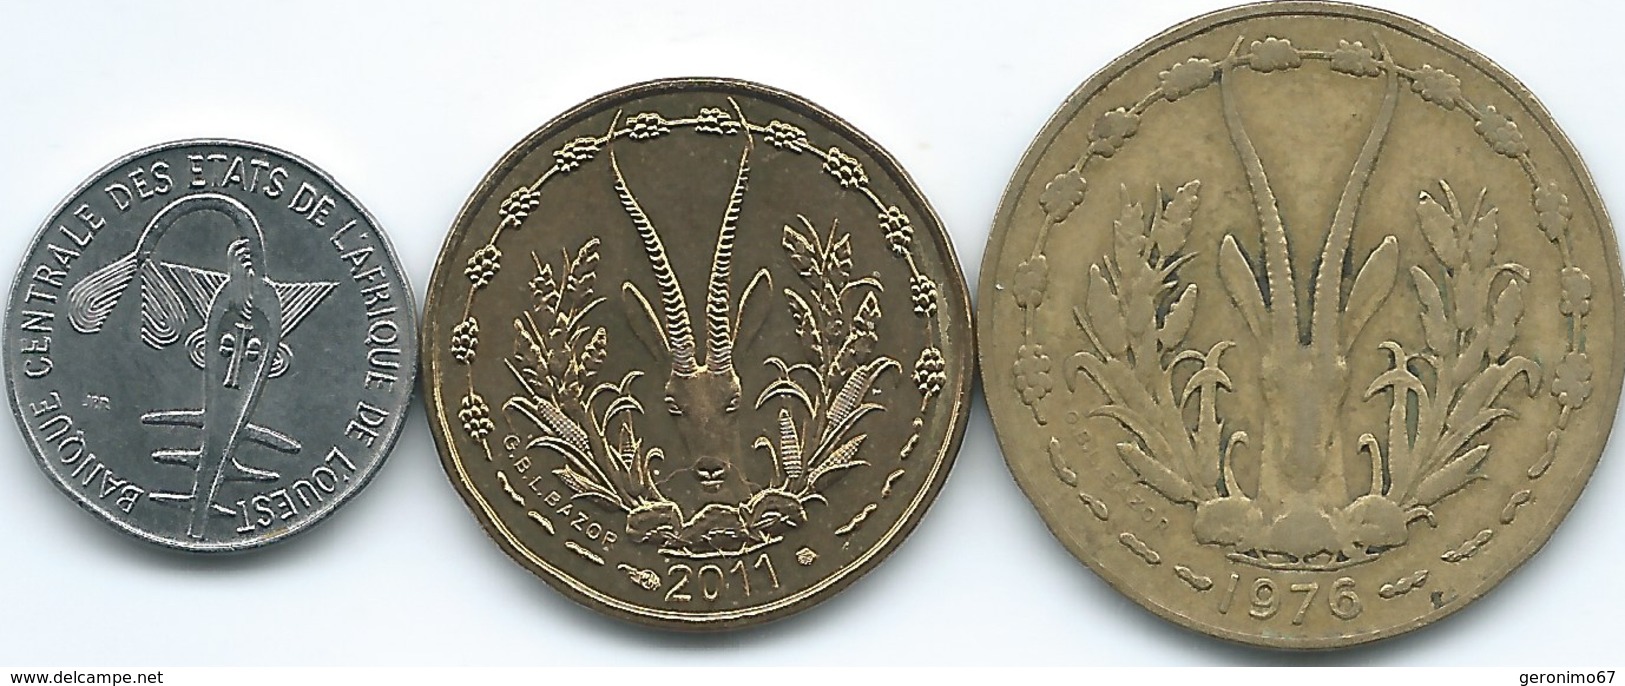 West AfrIcan States  - 1 Franc (1977 - KM8); 5 Francs (2011 - KM2a) & 10 Francs (1976 - KM1a) - Other - Africa